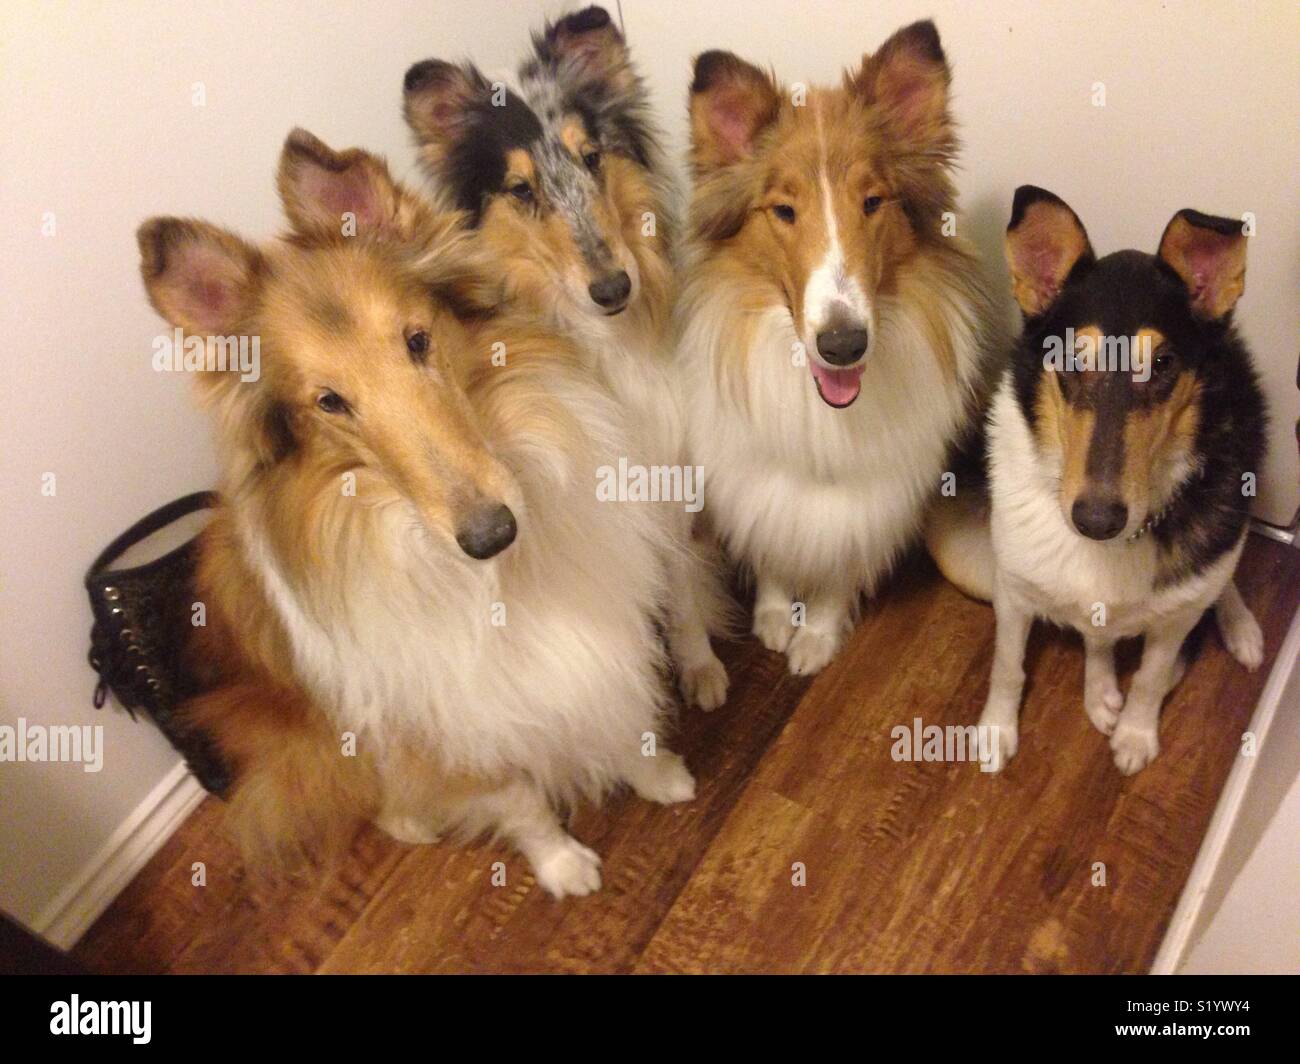 Four collies sitting together Stock Photo